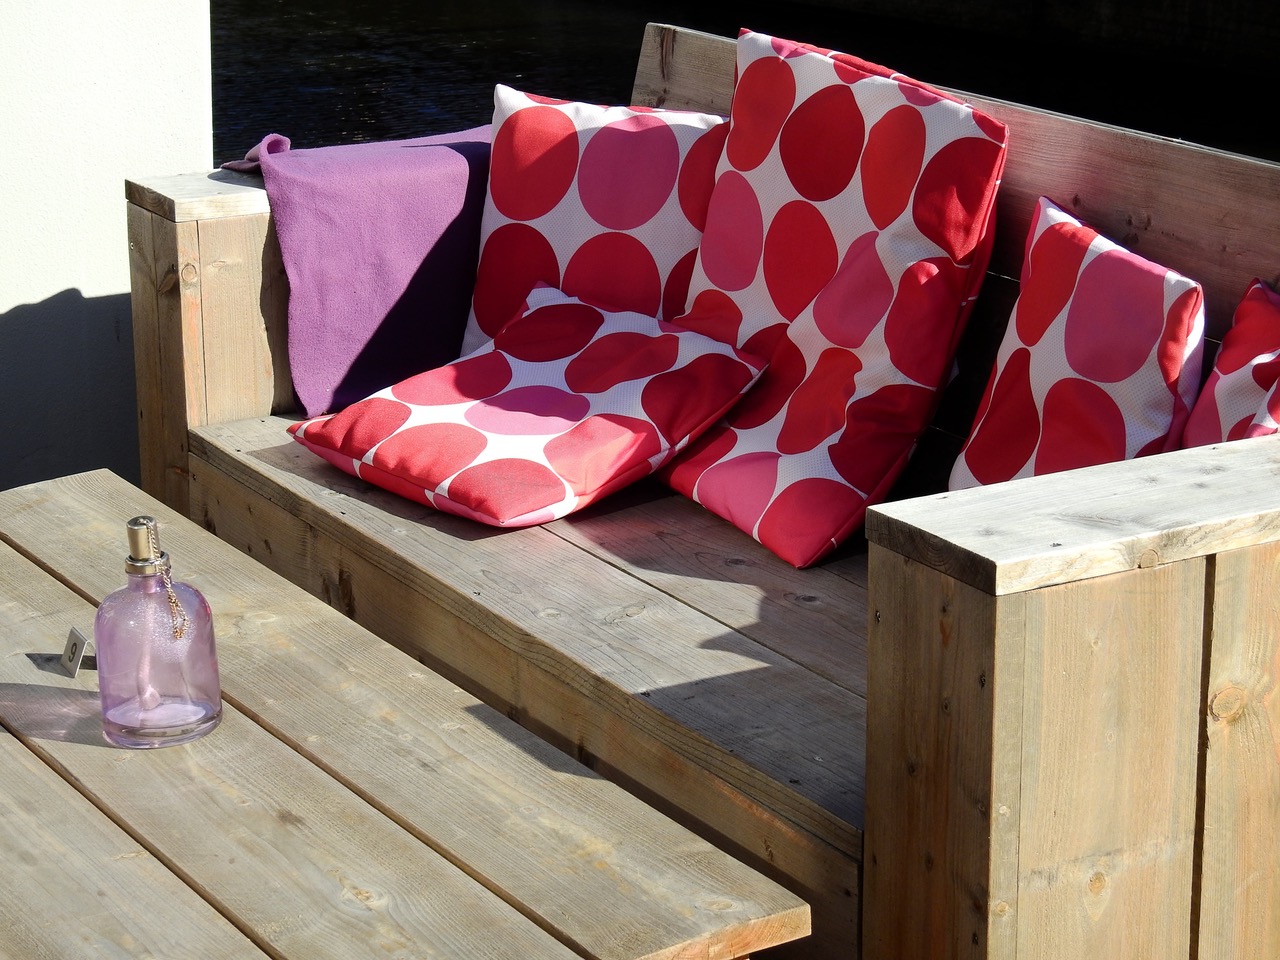 Comfy and colourful outdoor cushions.